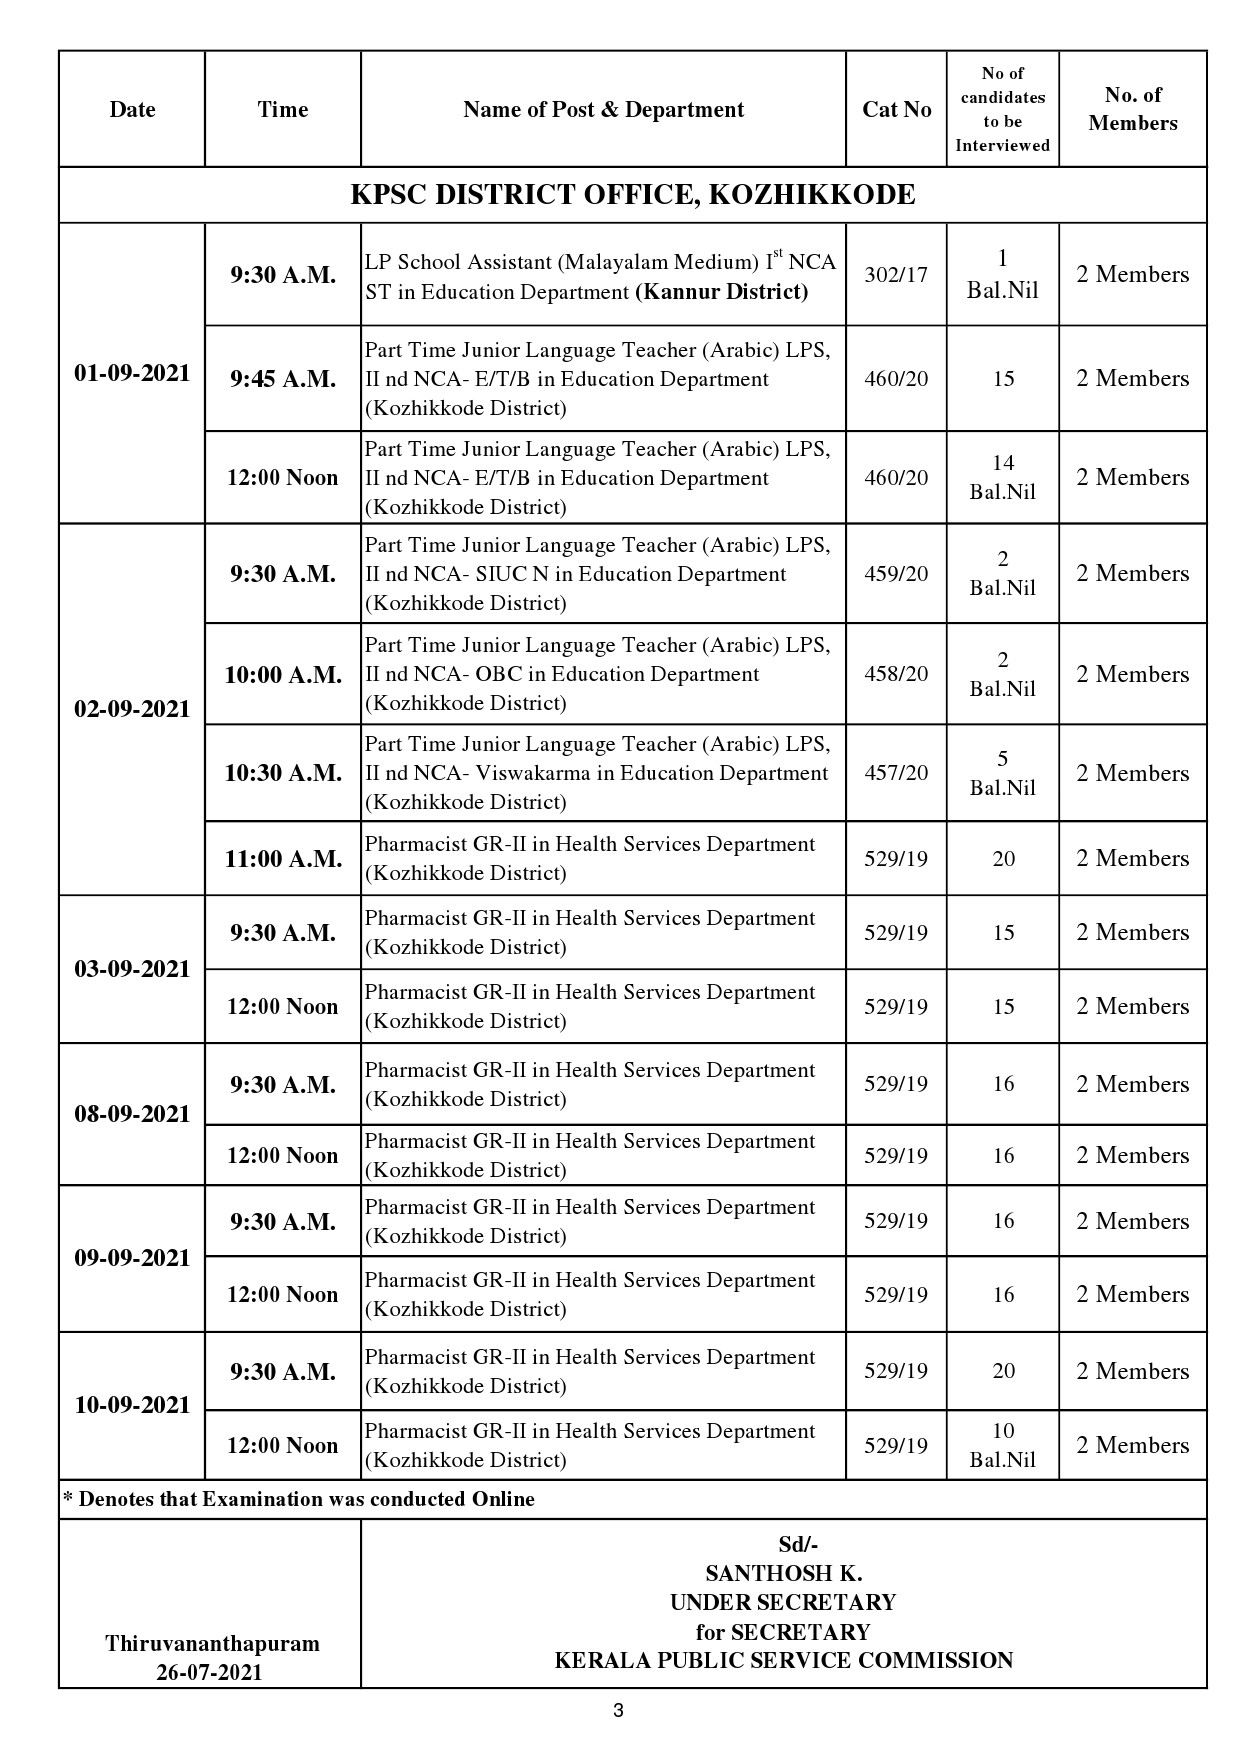 KPSC Additional Interview Programme For September 2021 - Notification Image 3